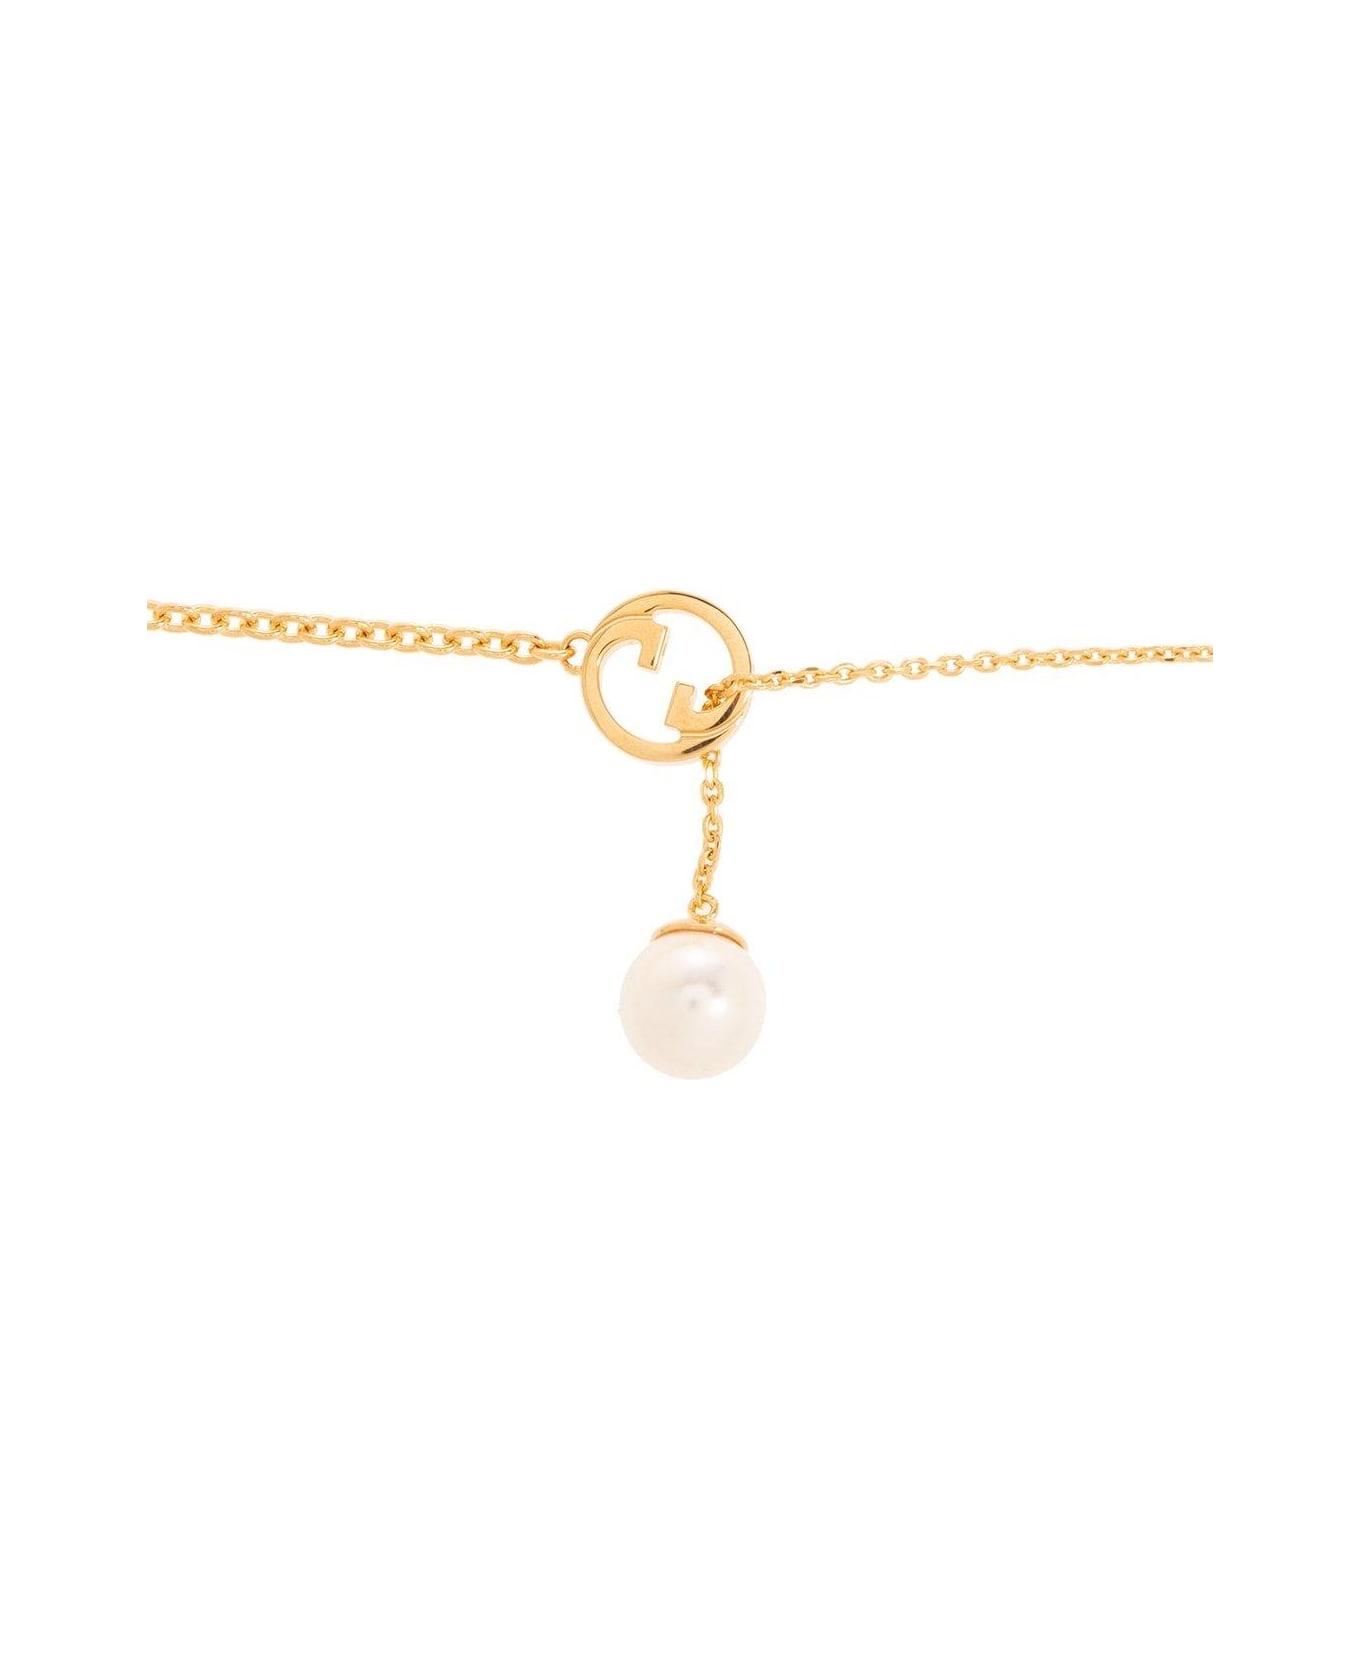 Gucci Blondie Embellished Drop Necklace - Cream ネックレス